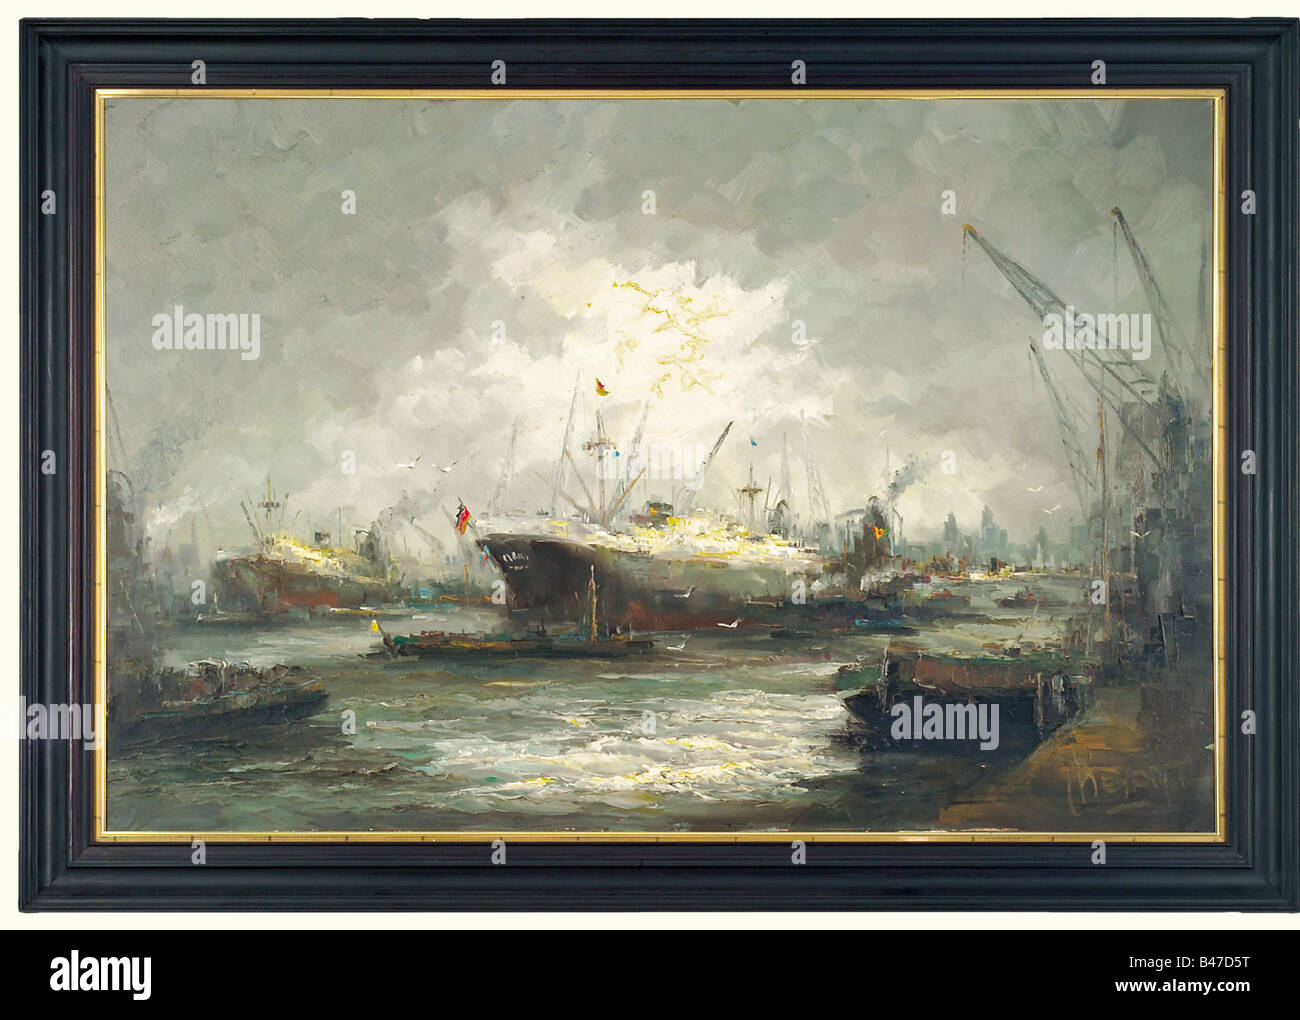 A ship in Amsterdam harbour., Oil on canvas. In the center of the picture there is a steam freighter under the German flag in front of a pier between tug boats and supply lighters. In the background, there is another steamer in front of a scene of the harbour, cranes, and warehouses. Signed, 'Bevort' on the lower right. Black, molded frame. Framed dimensions: 135 x 95 cm. Strong brush strokes and impasto technique emphasize the mood of the painting. fine arts, 20th century, navy, naval forces, object, objects, clipping, cut out, cut-out, cut-outs, pai, Artist's Copyright has not to be cleared Stock Photo